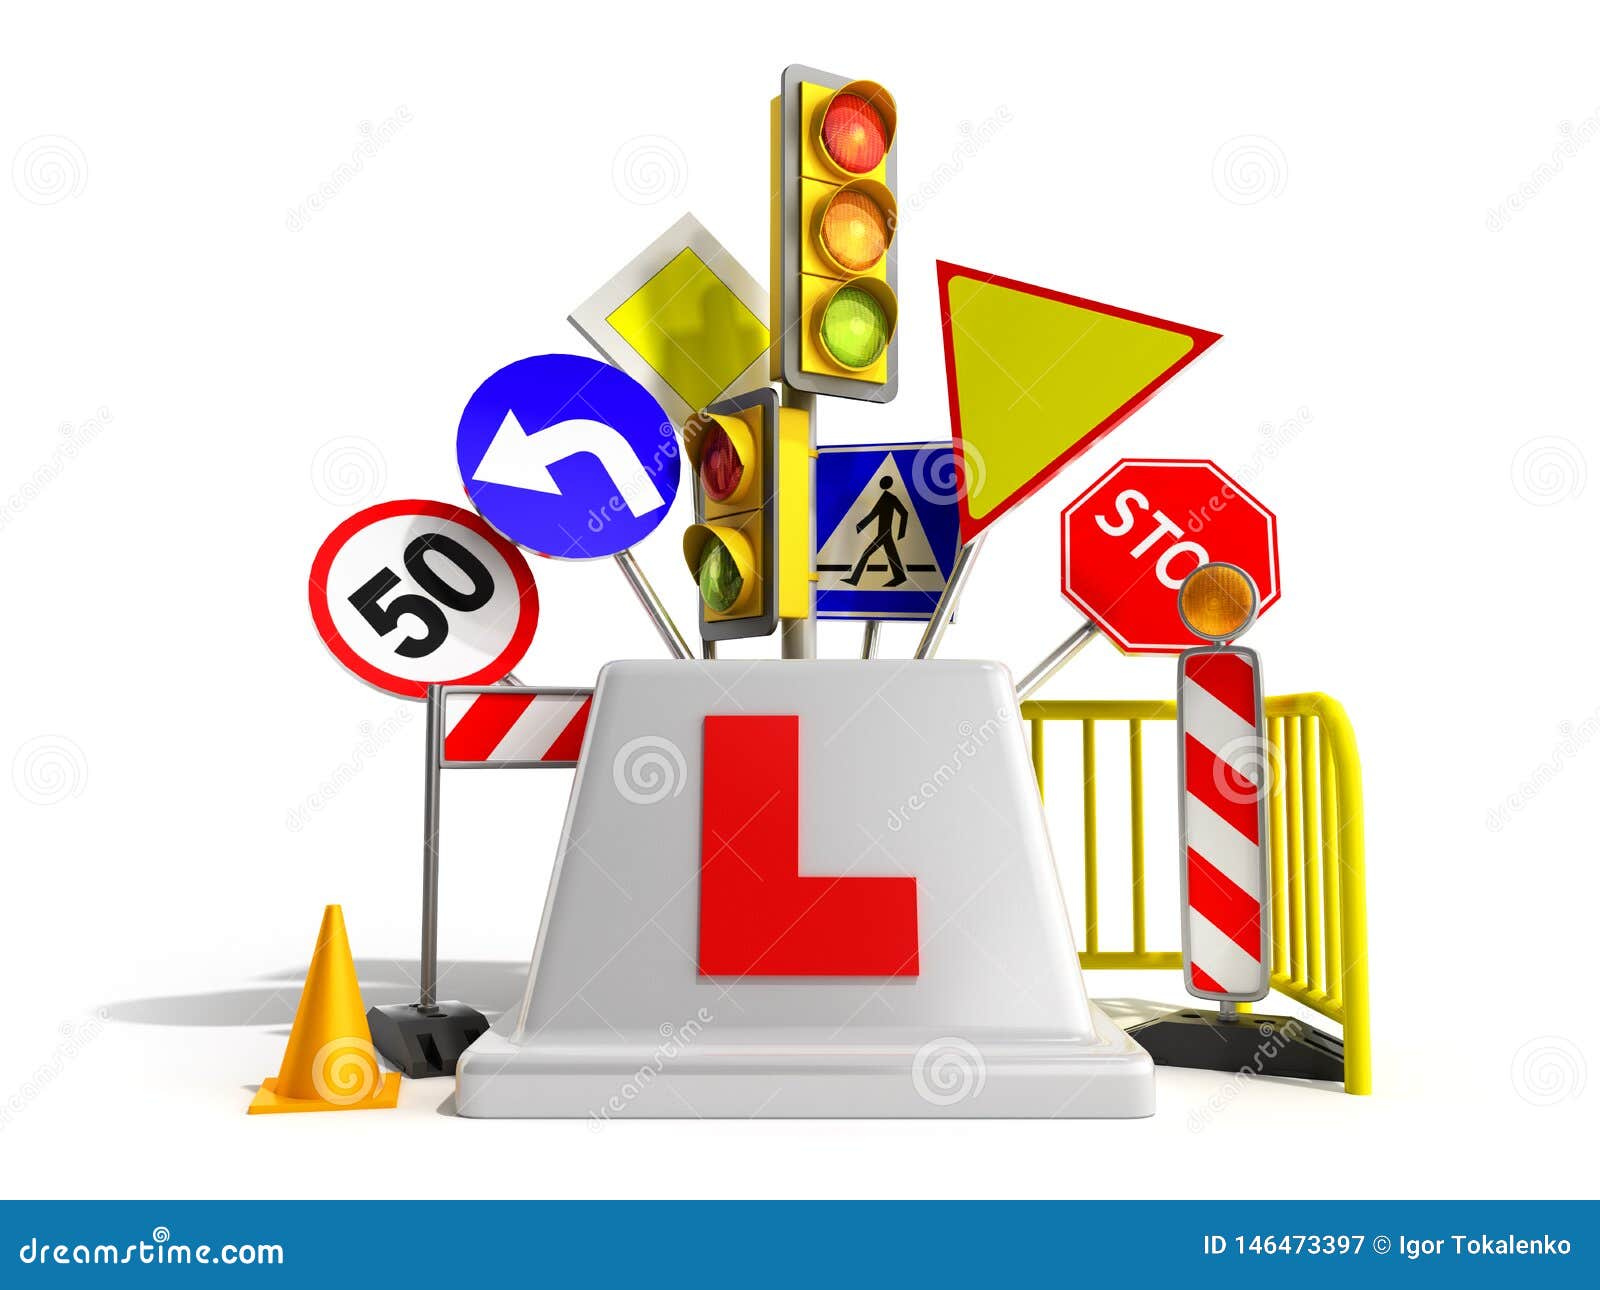 Concept of Driver School Logo Road Signs Traffic Lights Fencing 3d Render  on White Stock Illustration - Illustration of concept, destination:  146473397